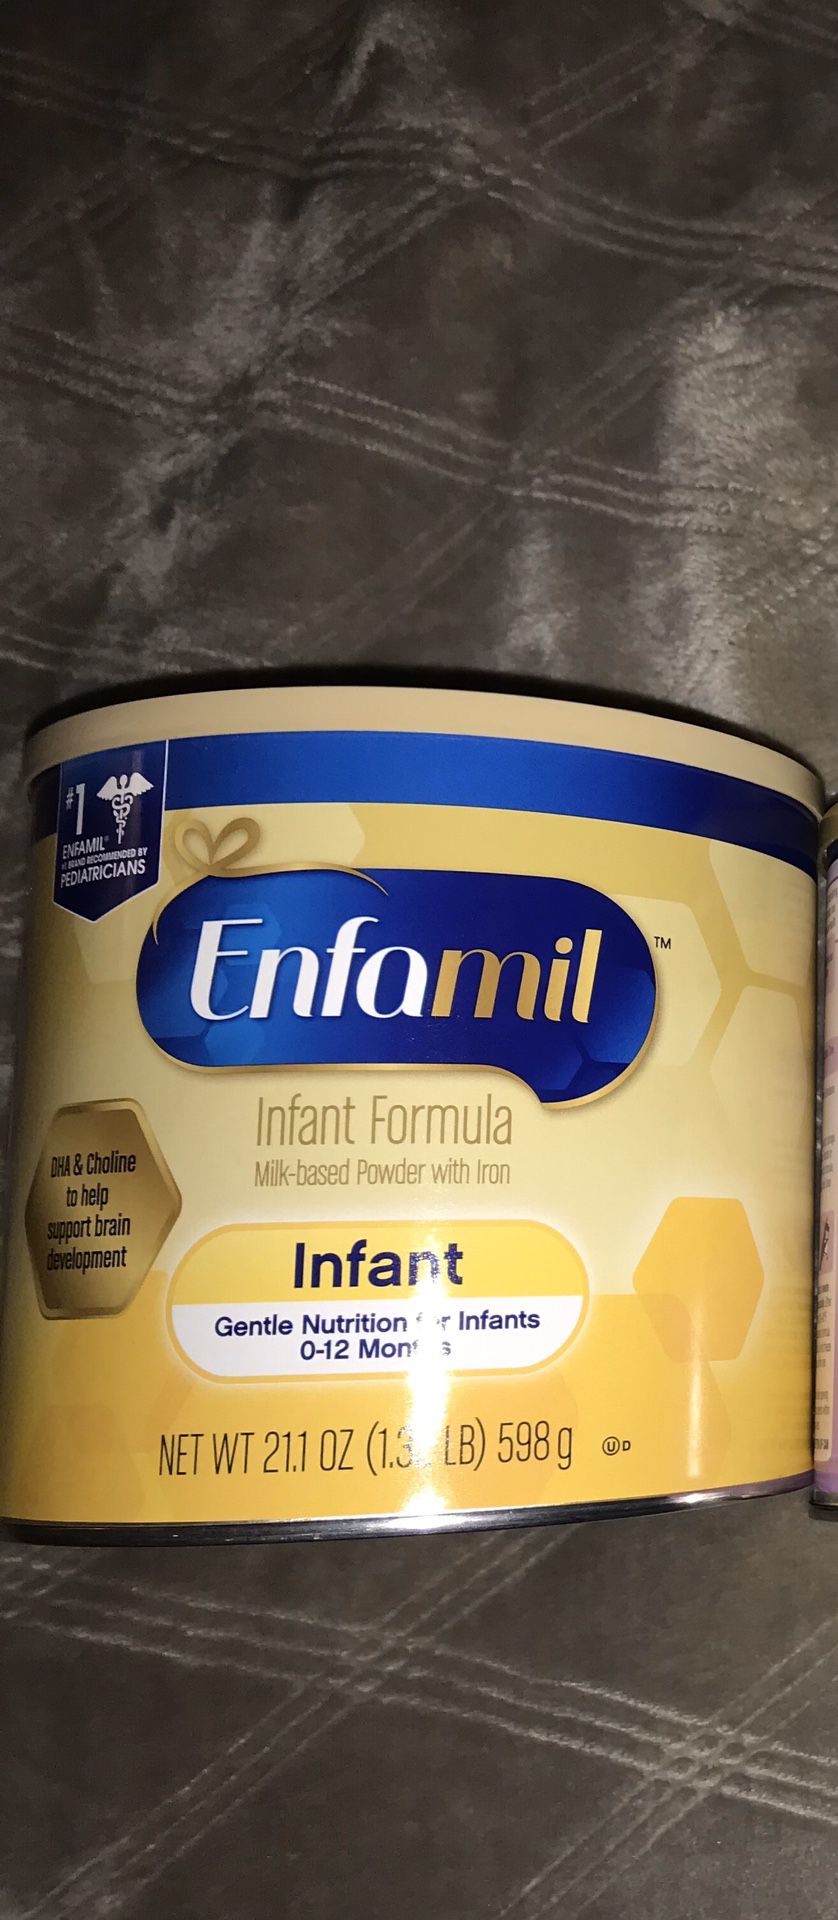 Big can of yellow enfamil